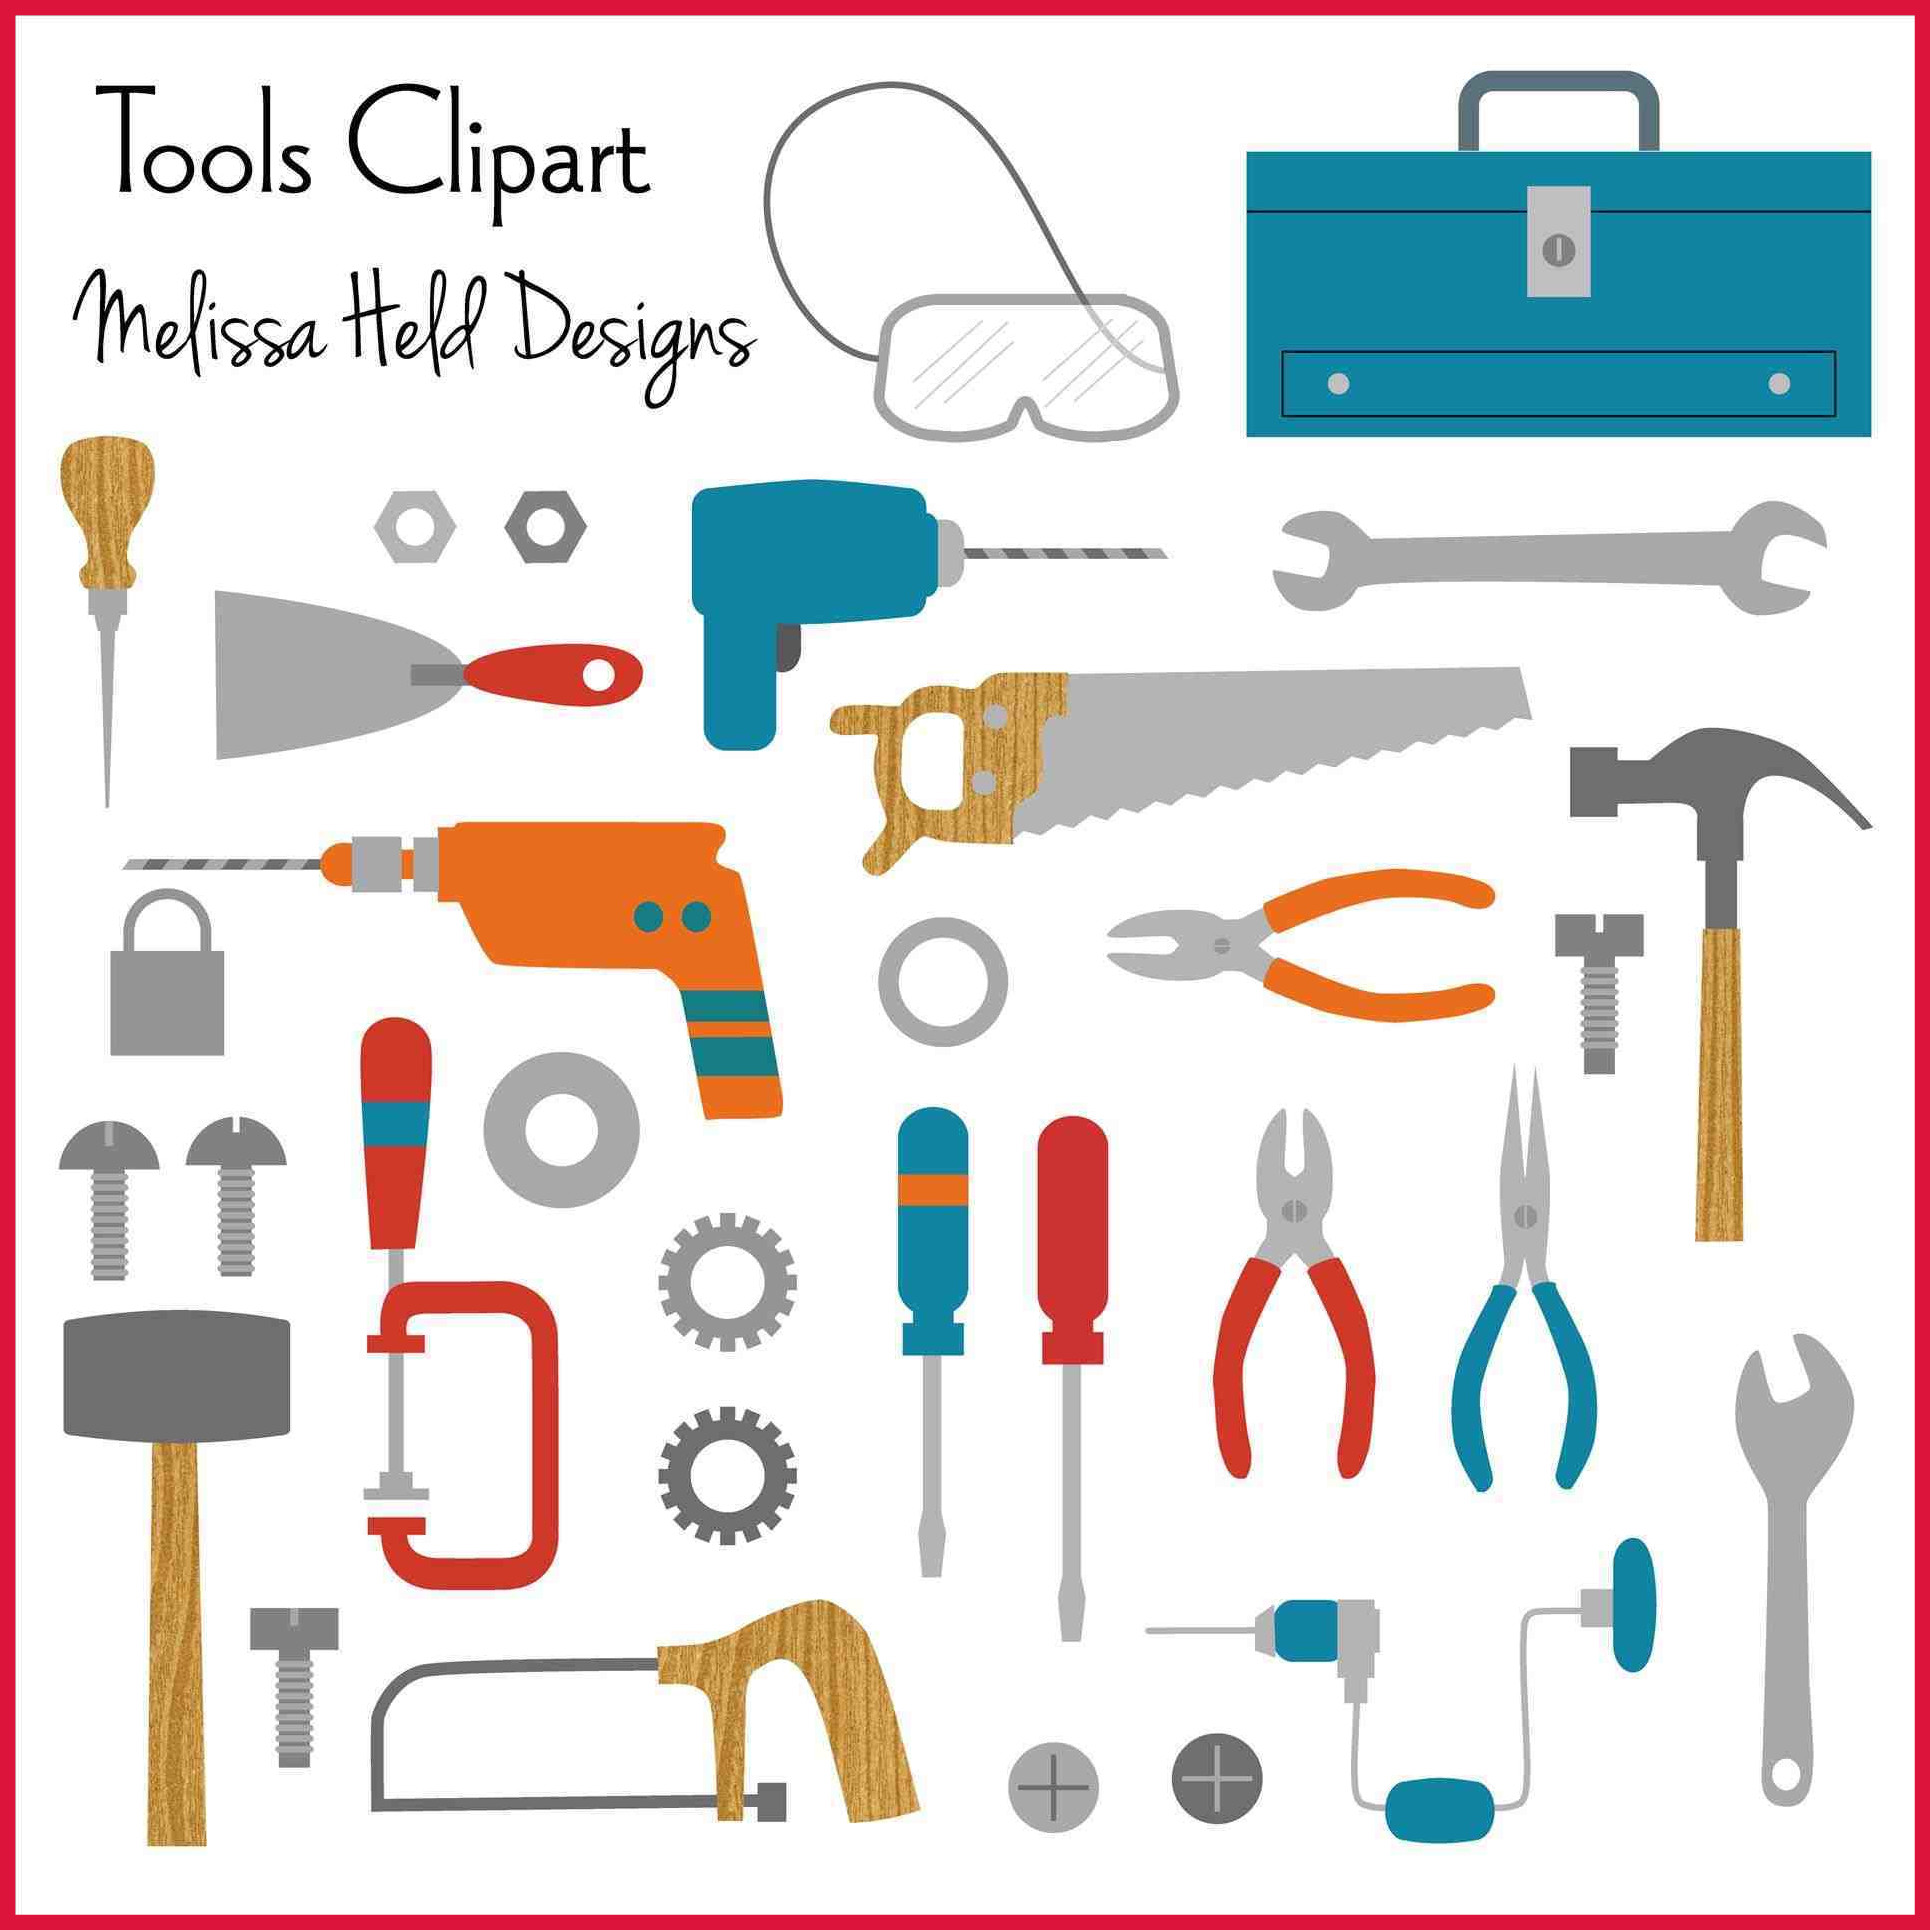 carpentry clipart engineering tool